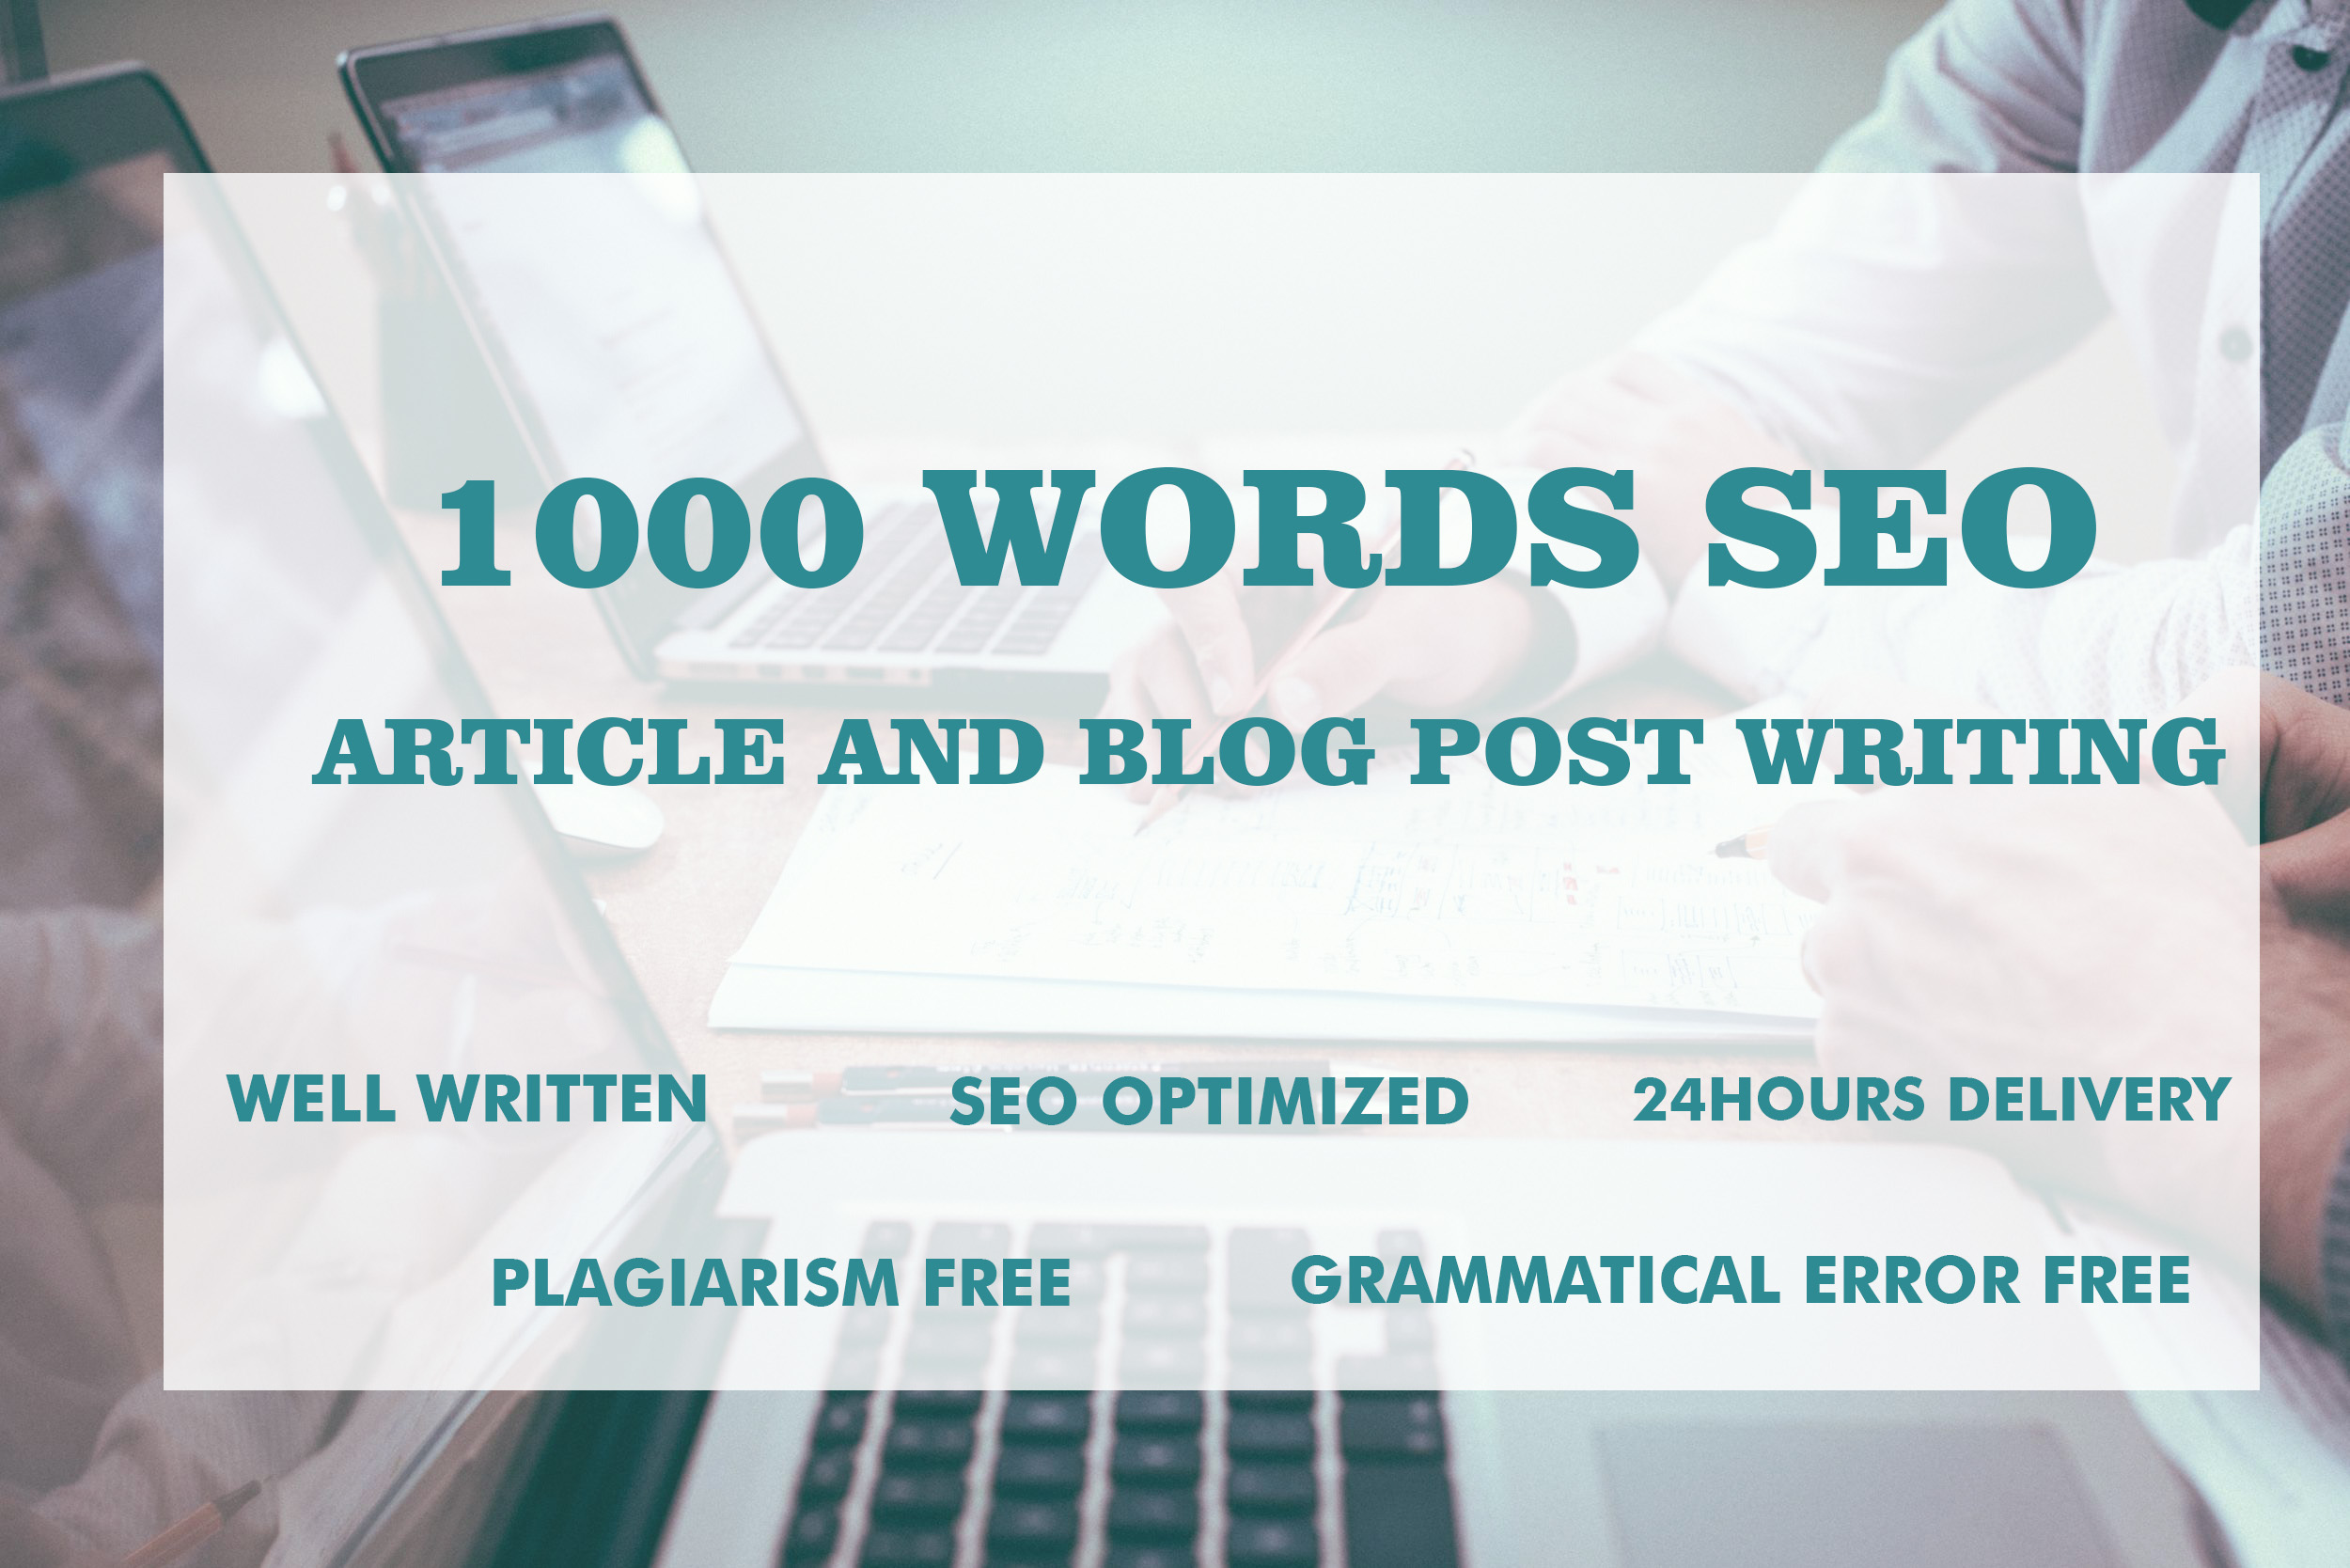 I will do professional 1000 words Article and Blog post writing with no plagiarism within 24 hours